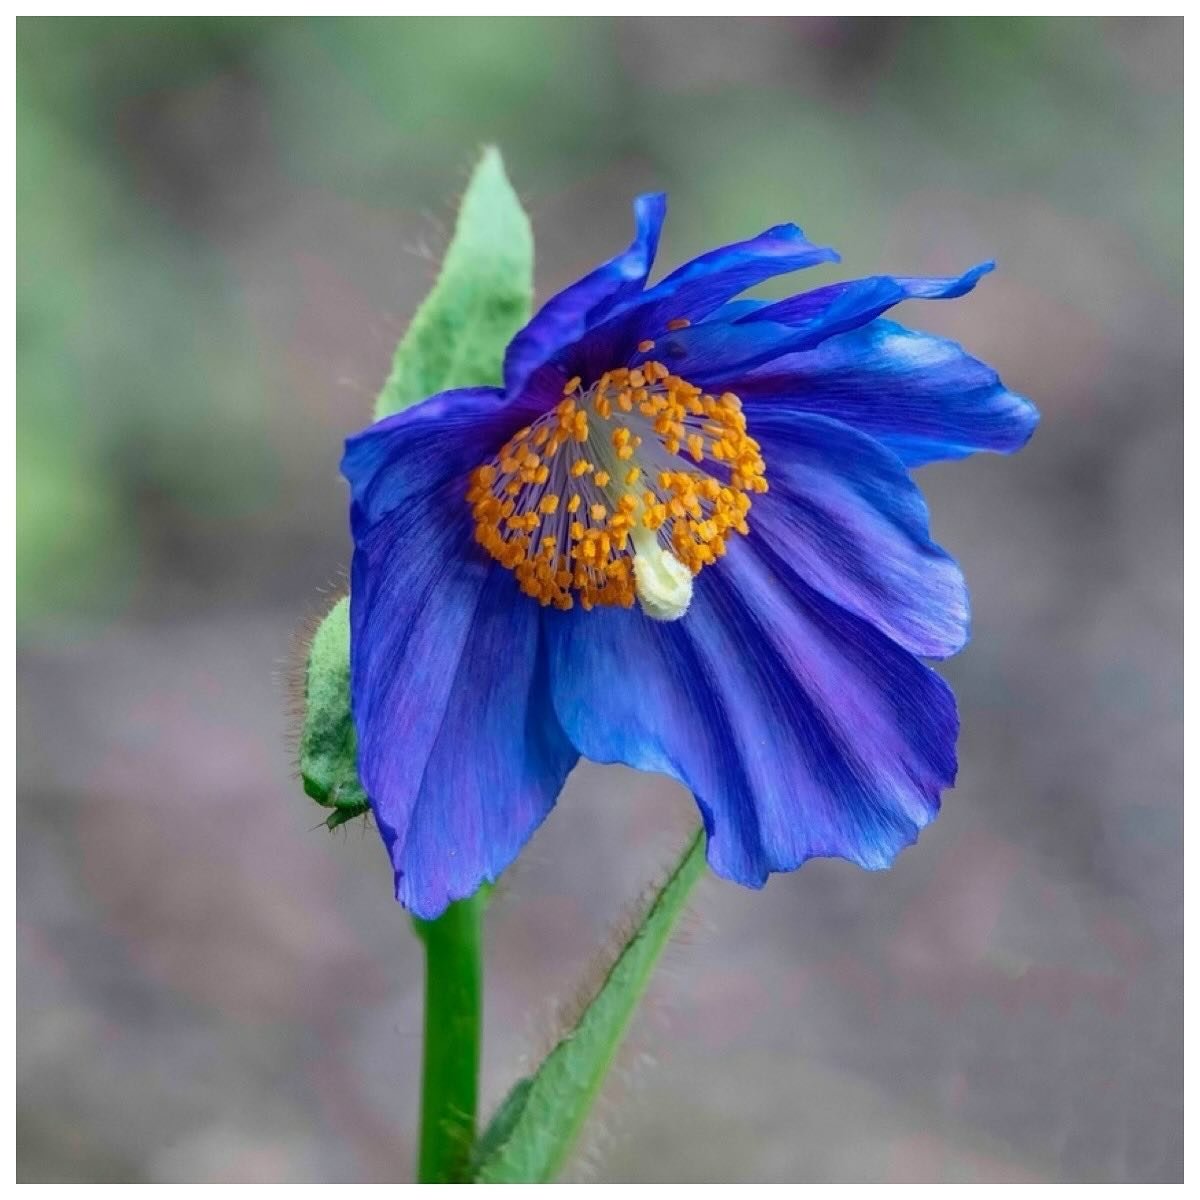 Love this recent picture of the stunning Meconopsis or blue poppy in the woodland in #sheffieldbotanicalgardens&hellip;&hellip;

📷 with thanks to Rod Egglestone
.
.
.
.
.
#meconopsis #bluepoppy #himalyanpoppy #perennialplants #theoutdoorcity #ourfav